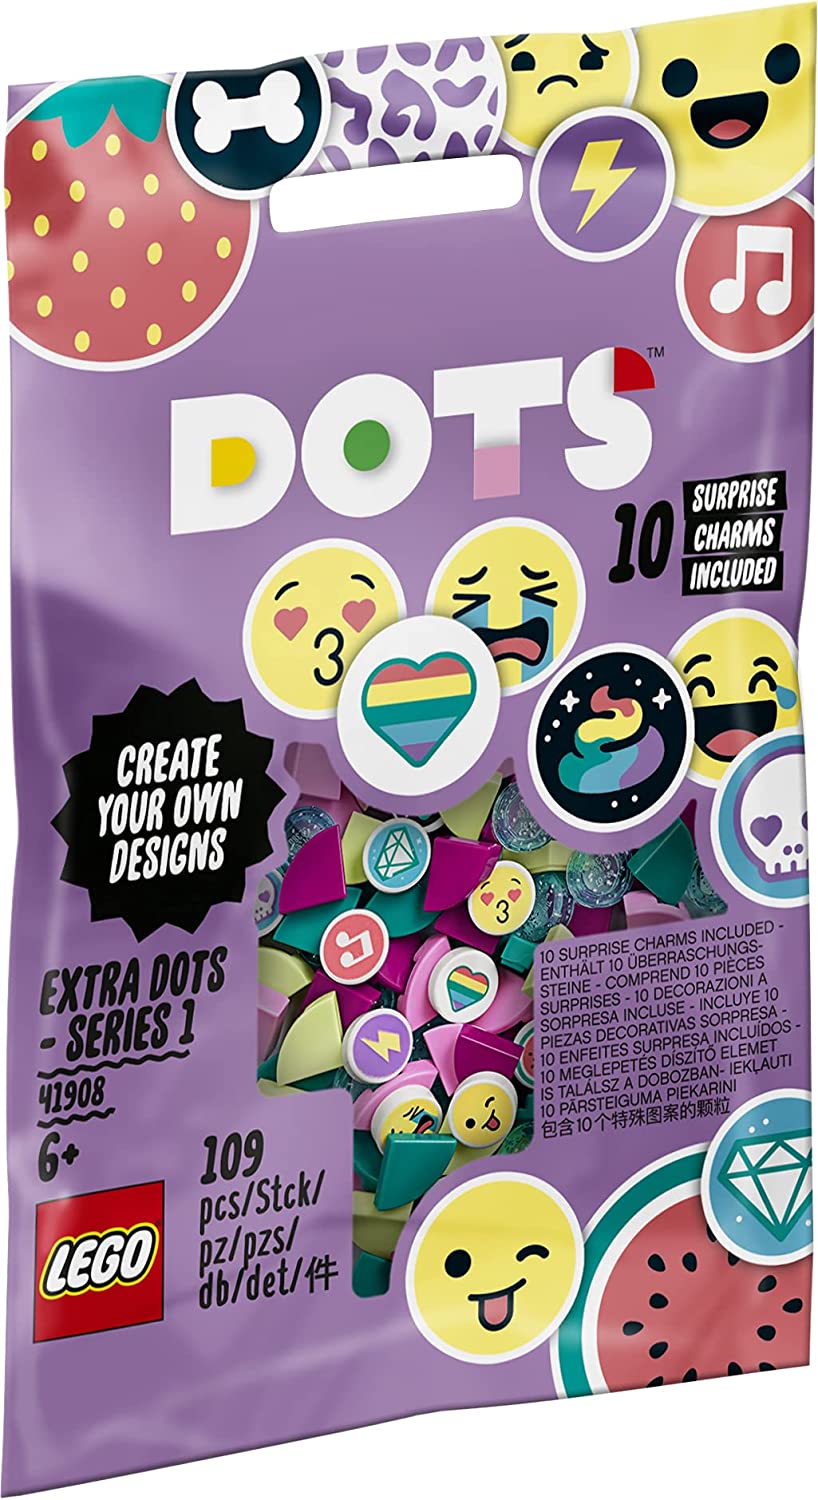 Extra DOTS - series 1